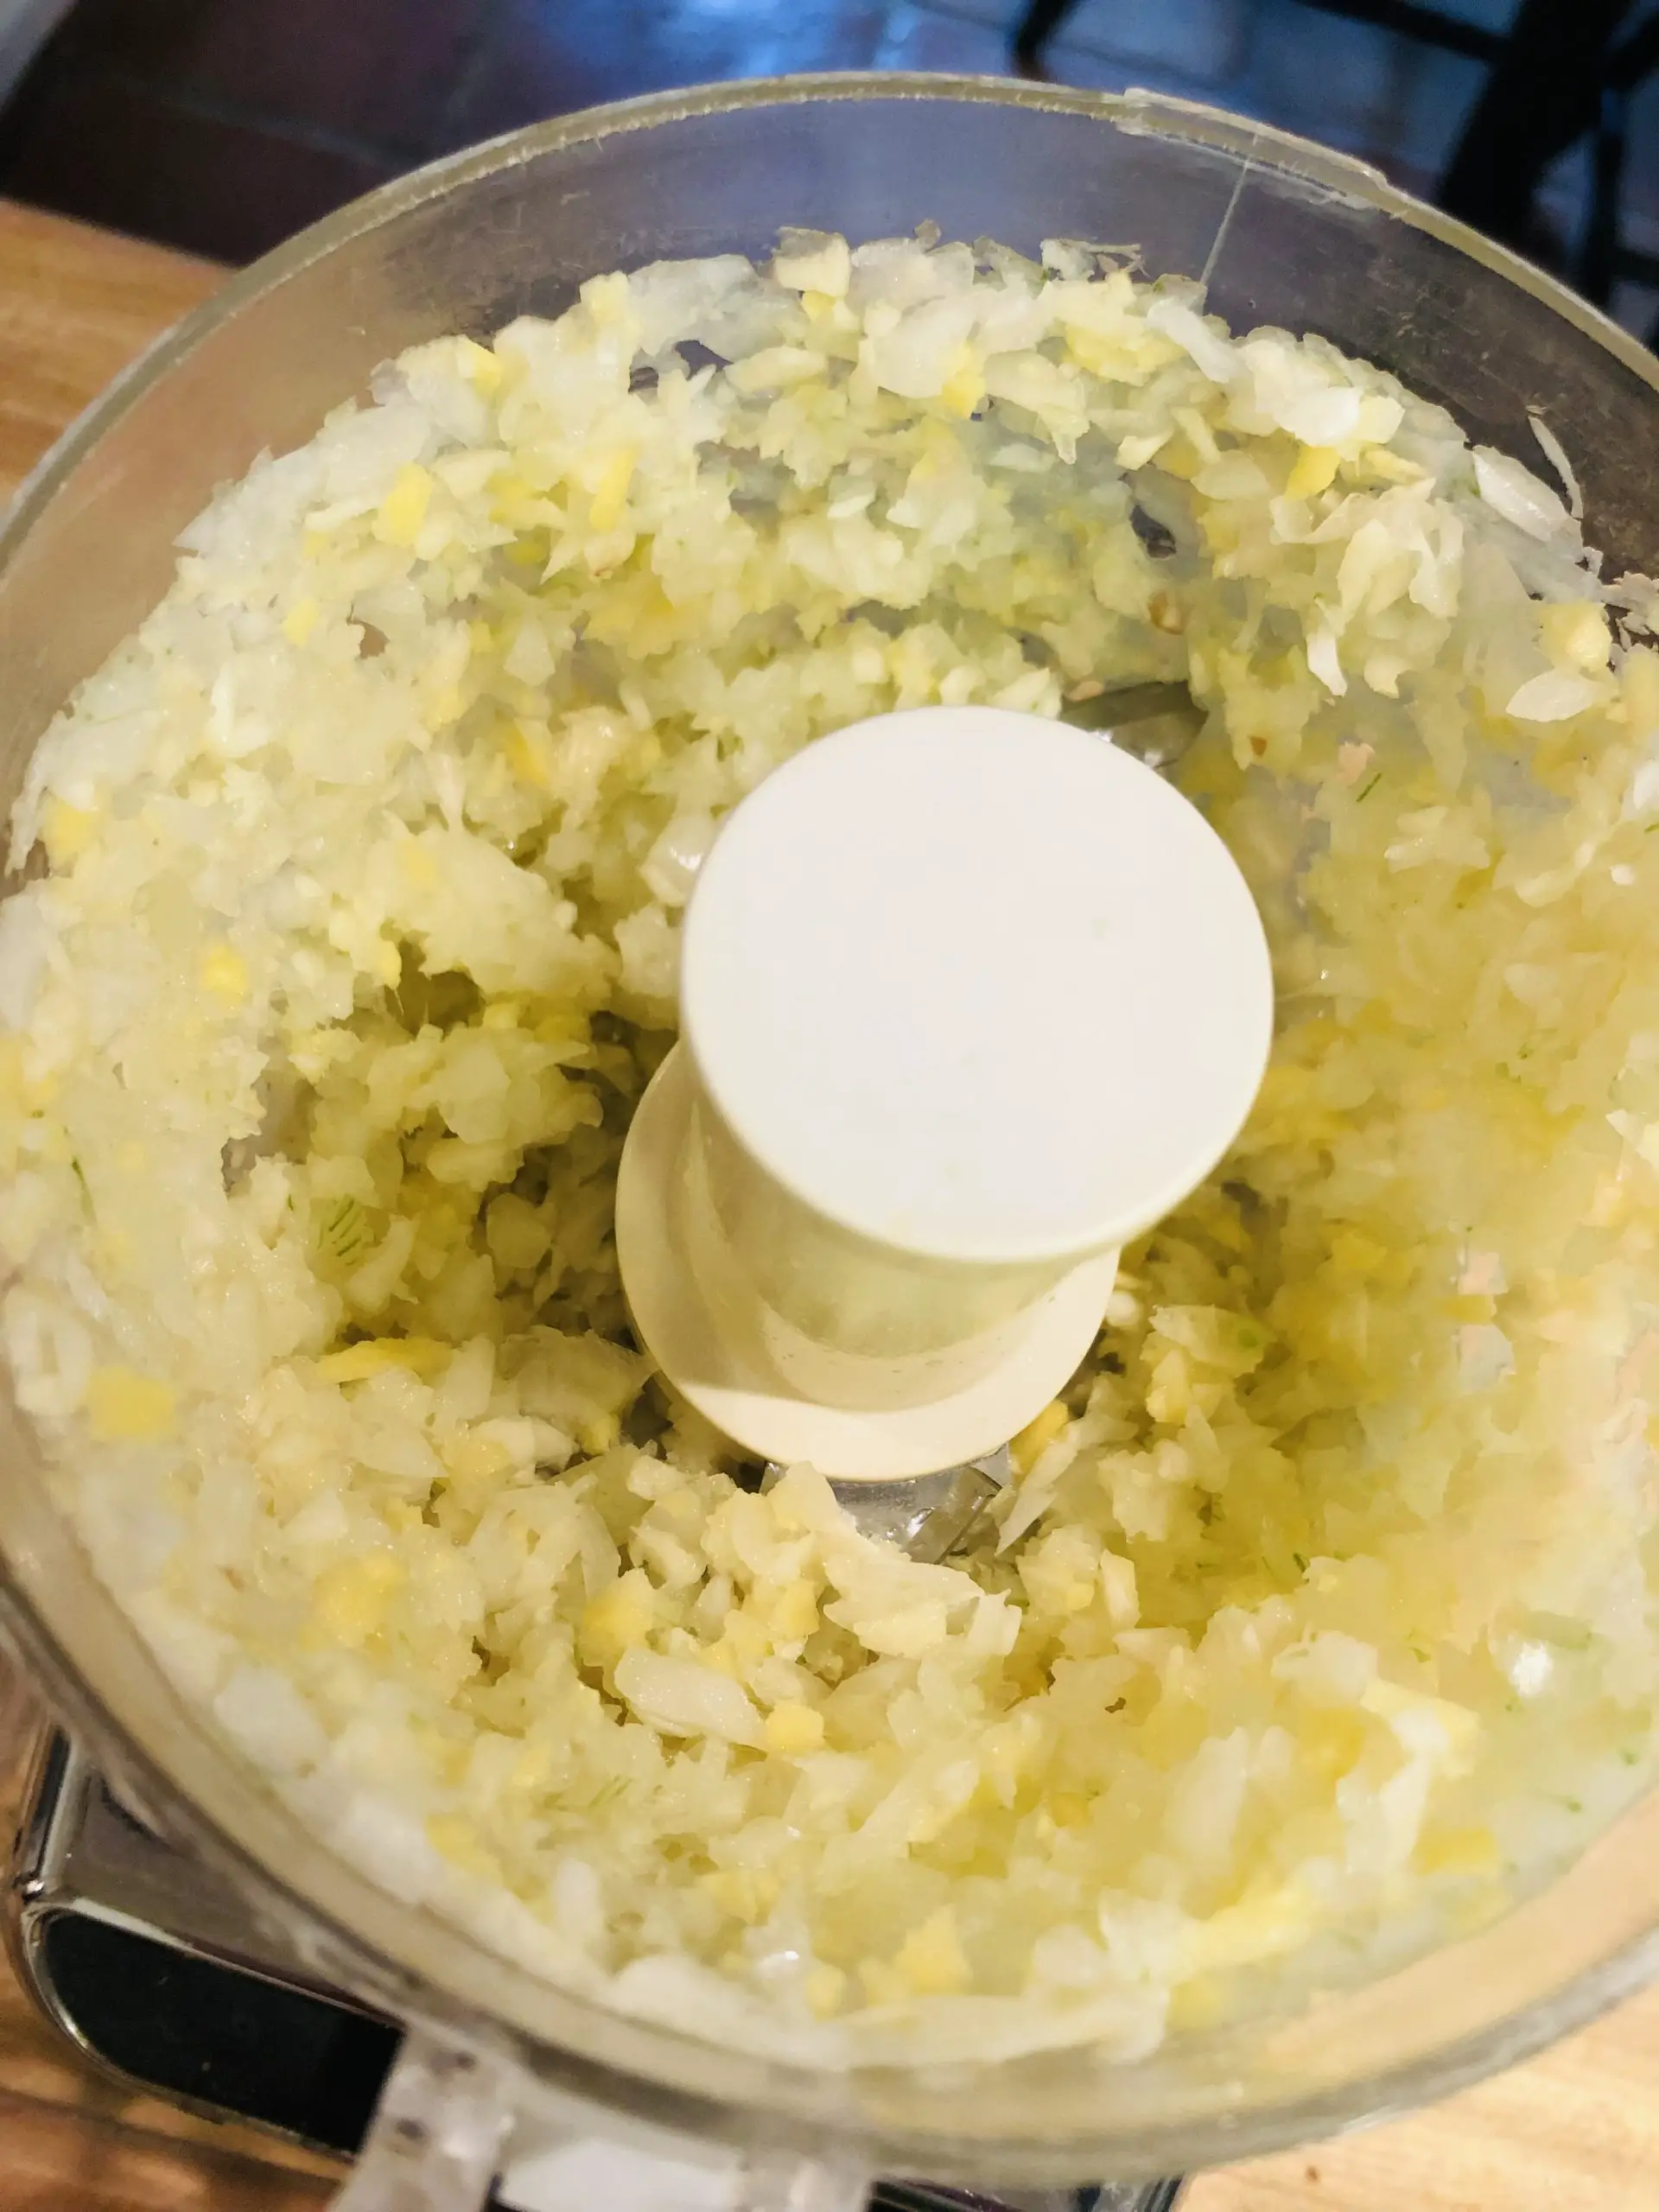 Minced onion, garlic, and ginger in a food processor